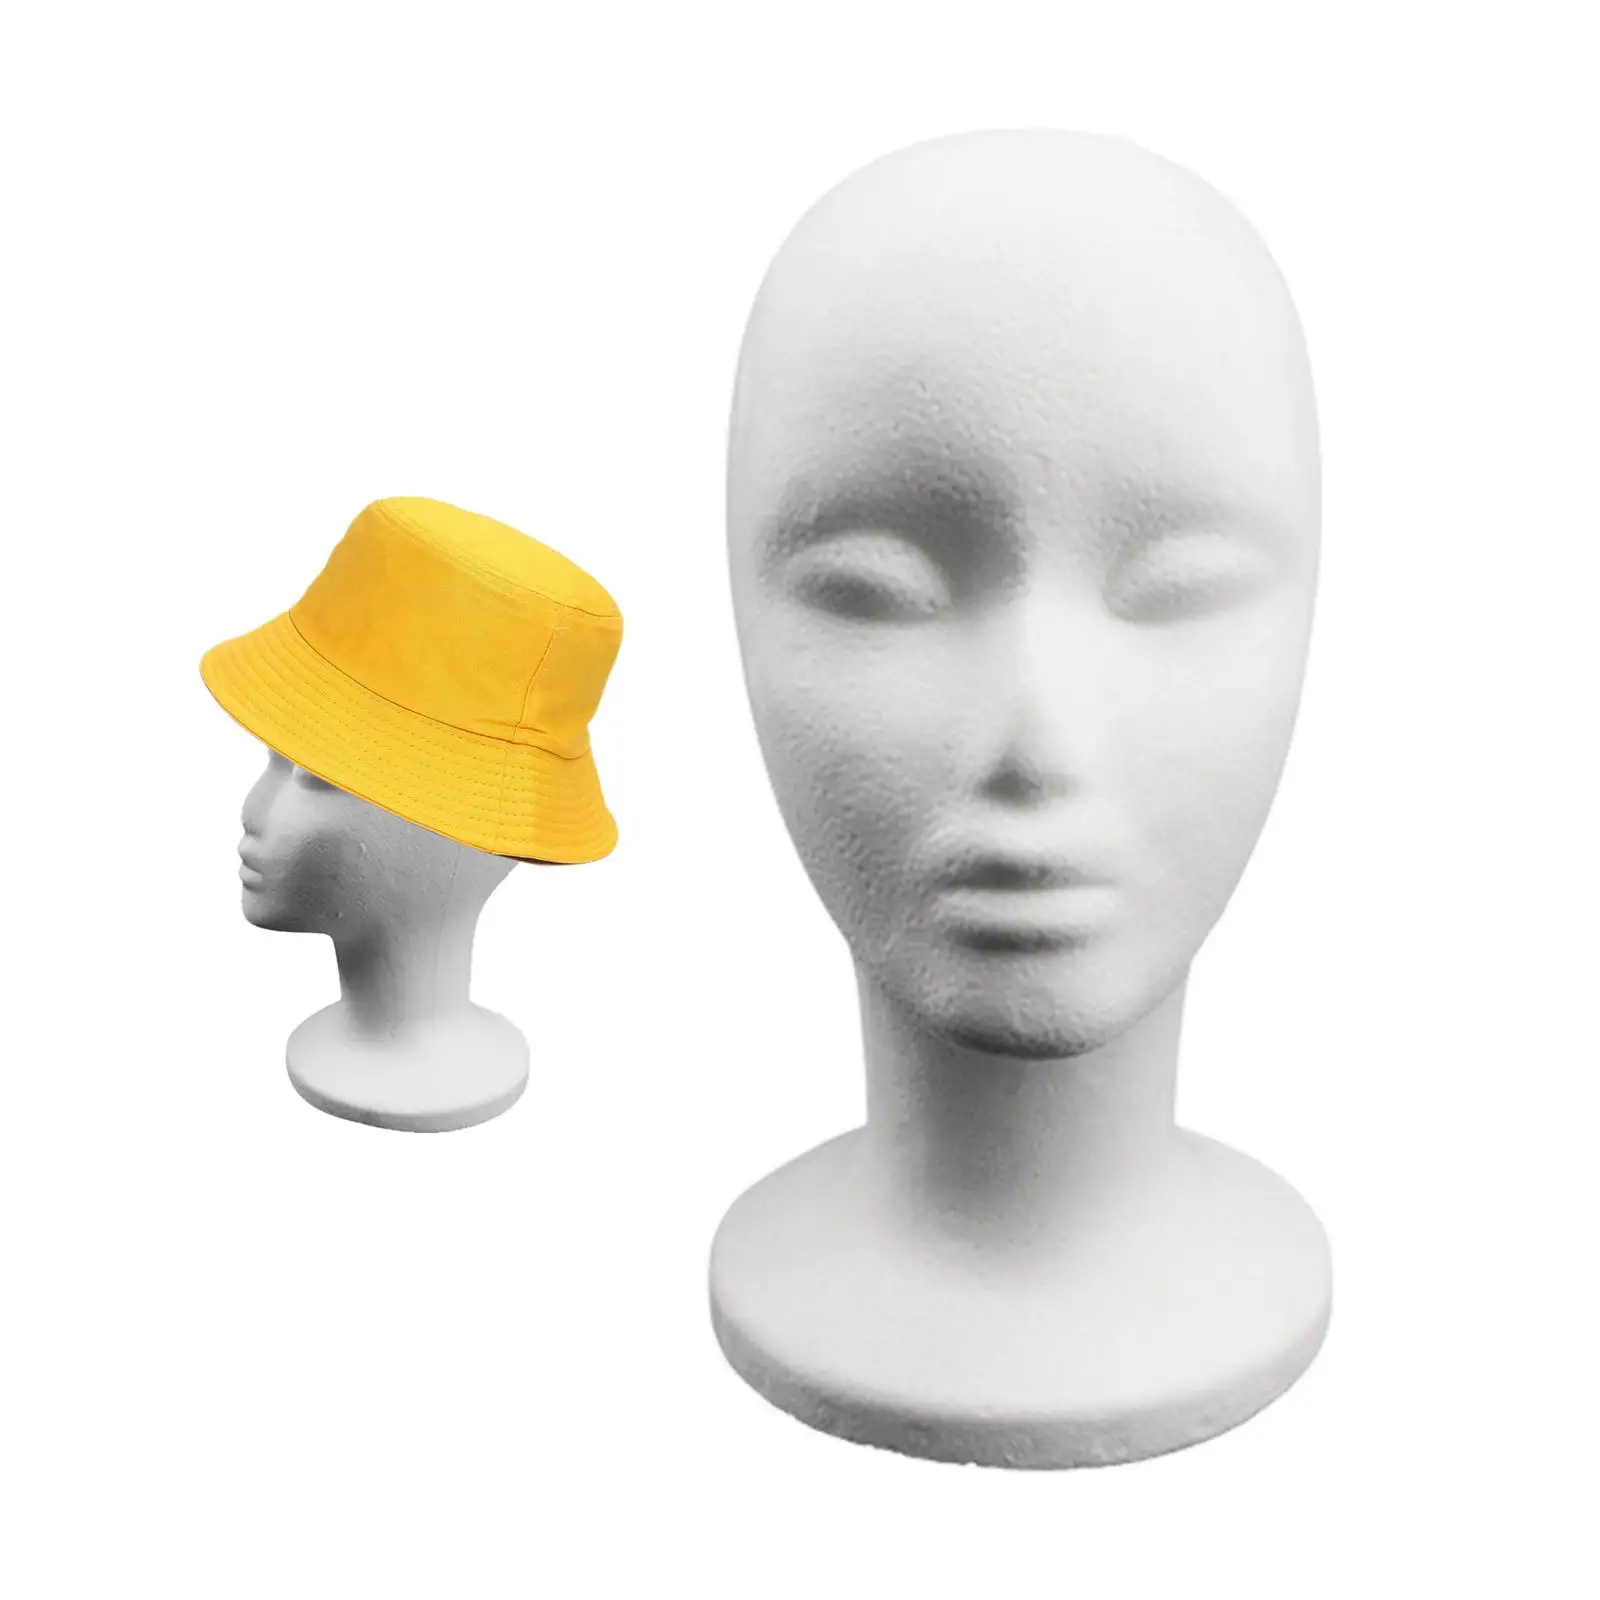  Display Stand Model and Display Hair for Headphone Hats Home